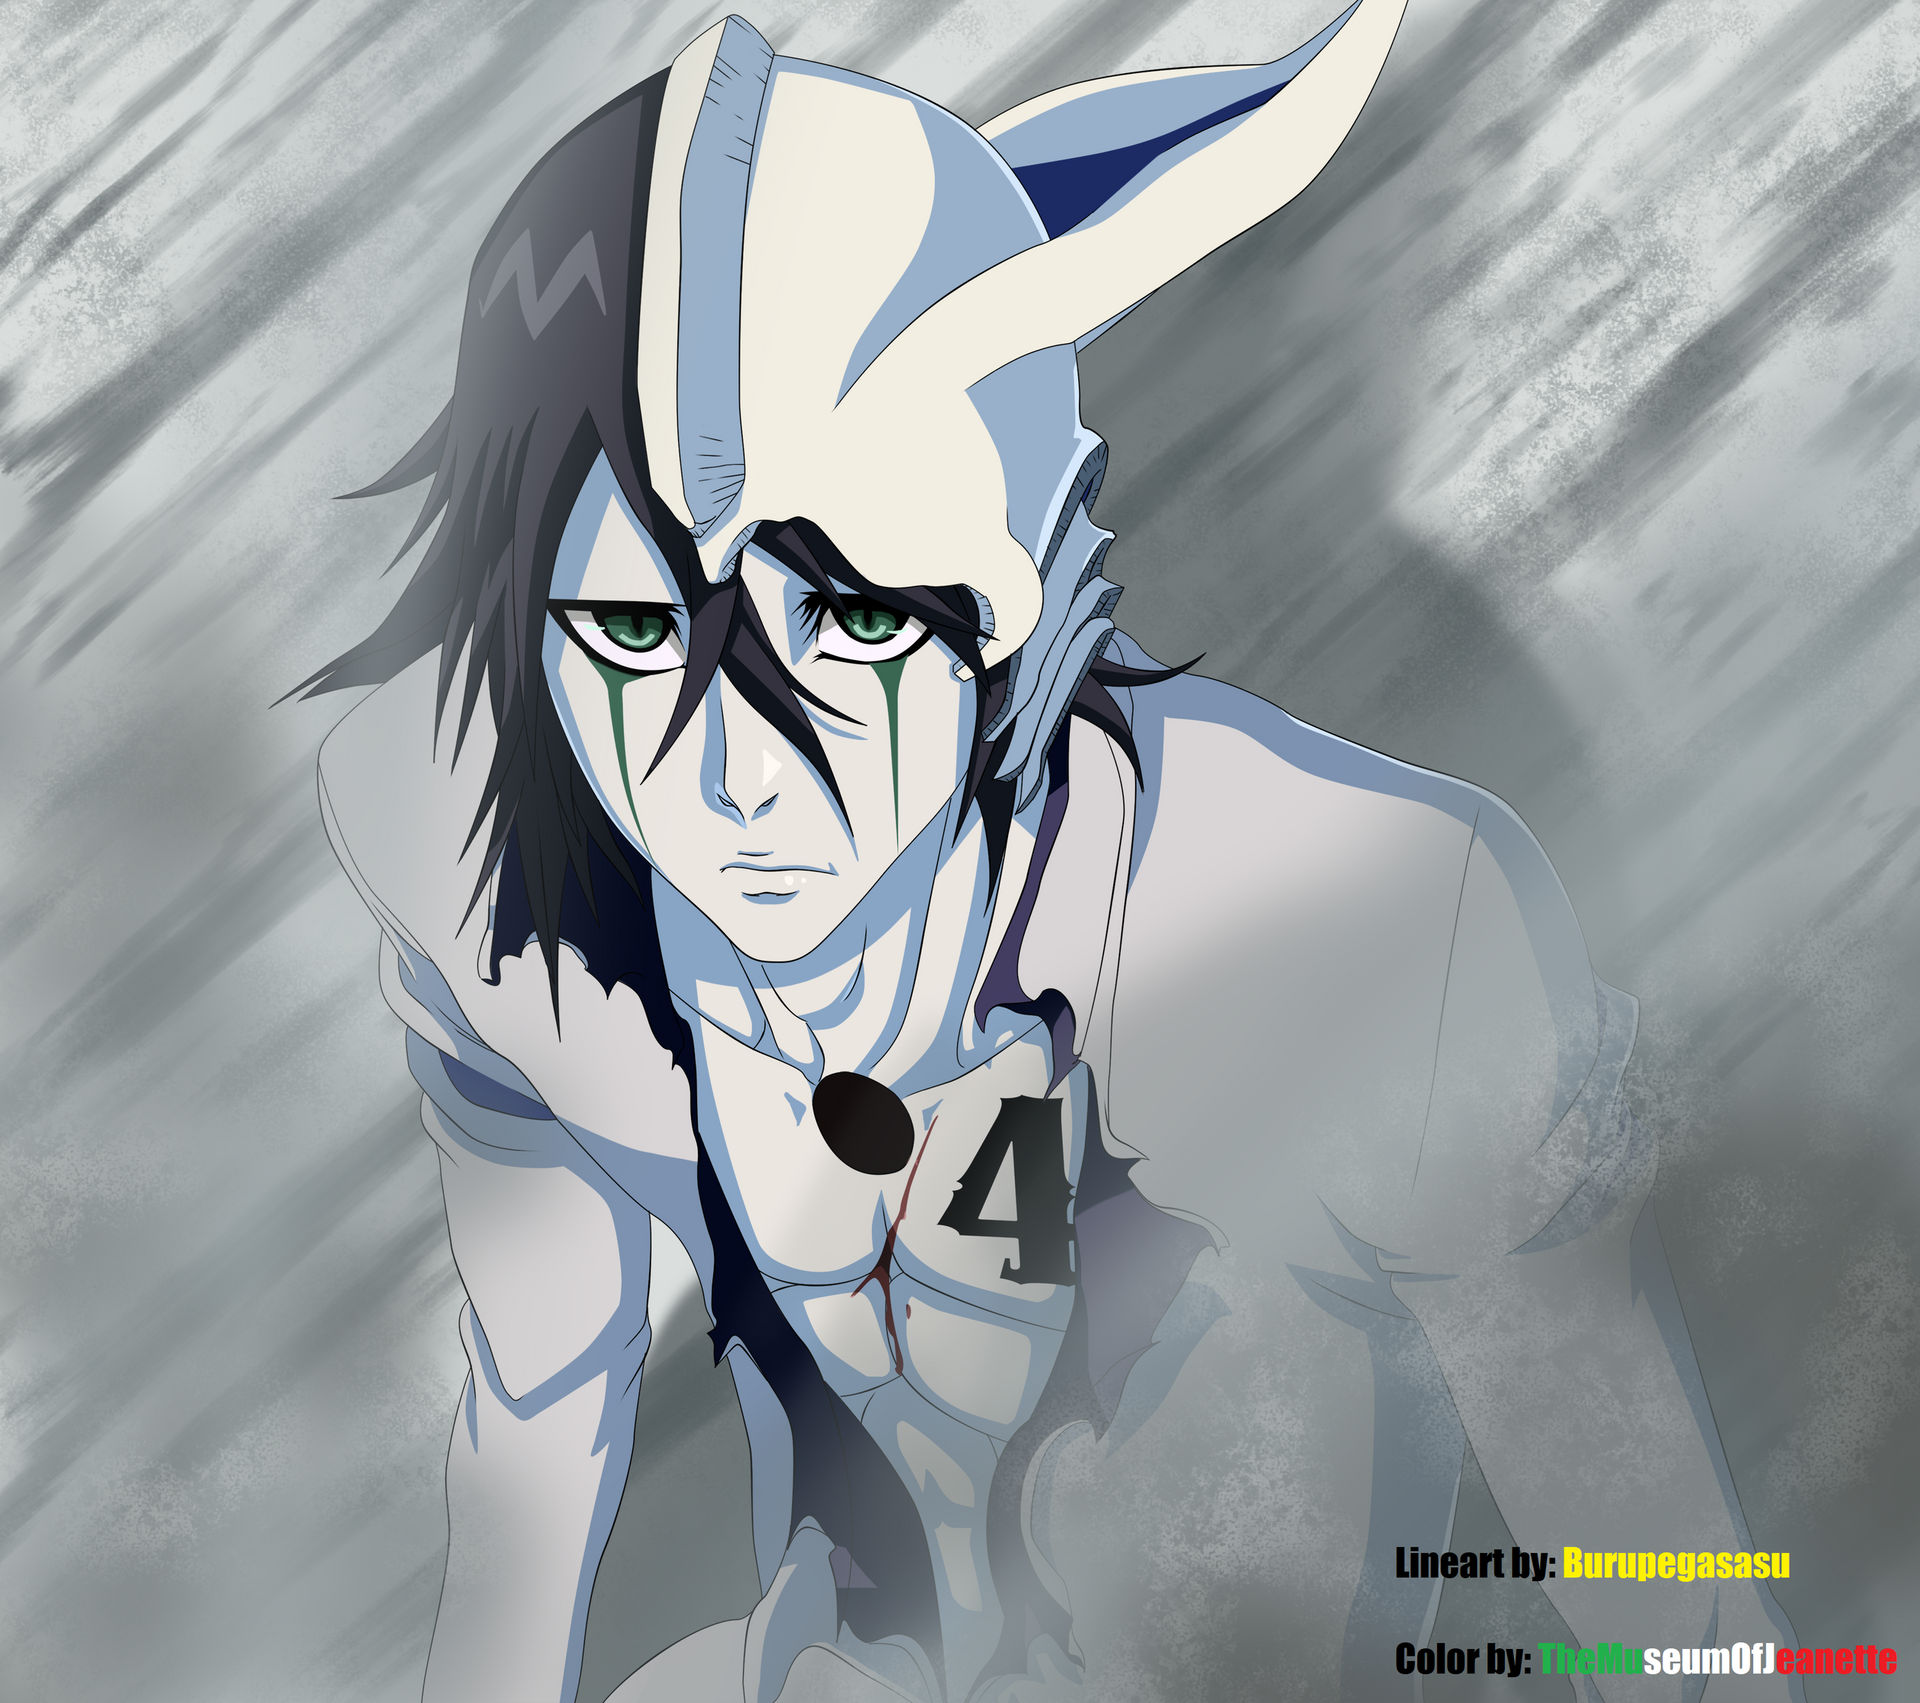 Ulquiorra (lineart and bases) commission by ZAIN-ART on DeviantArt